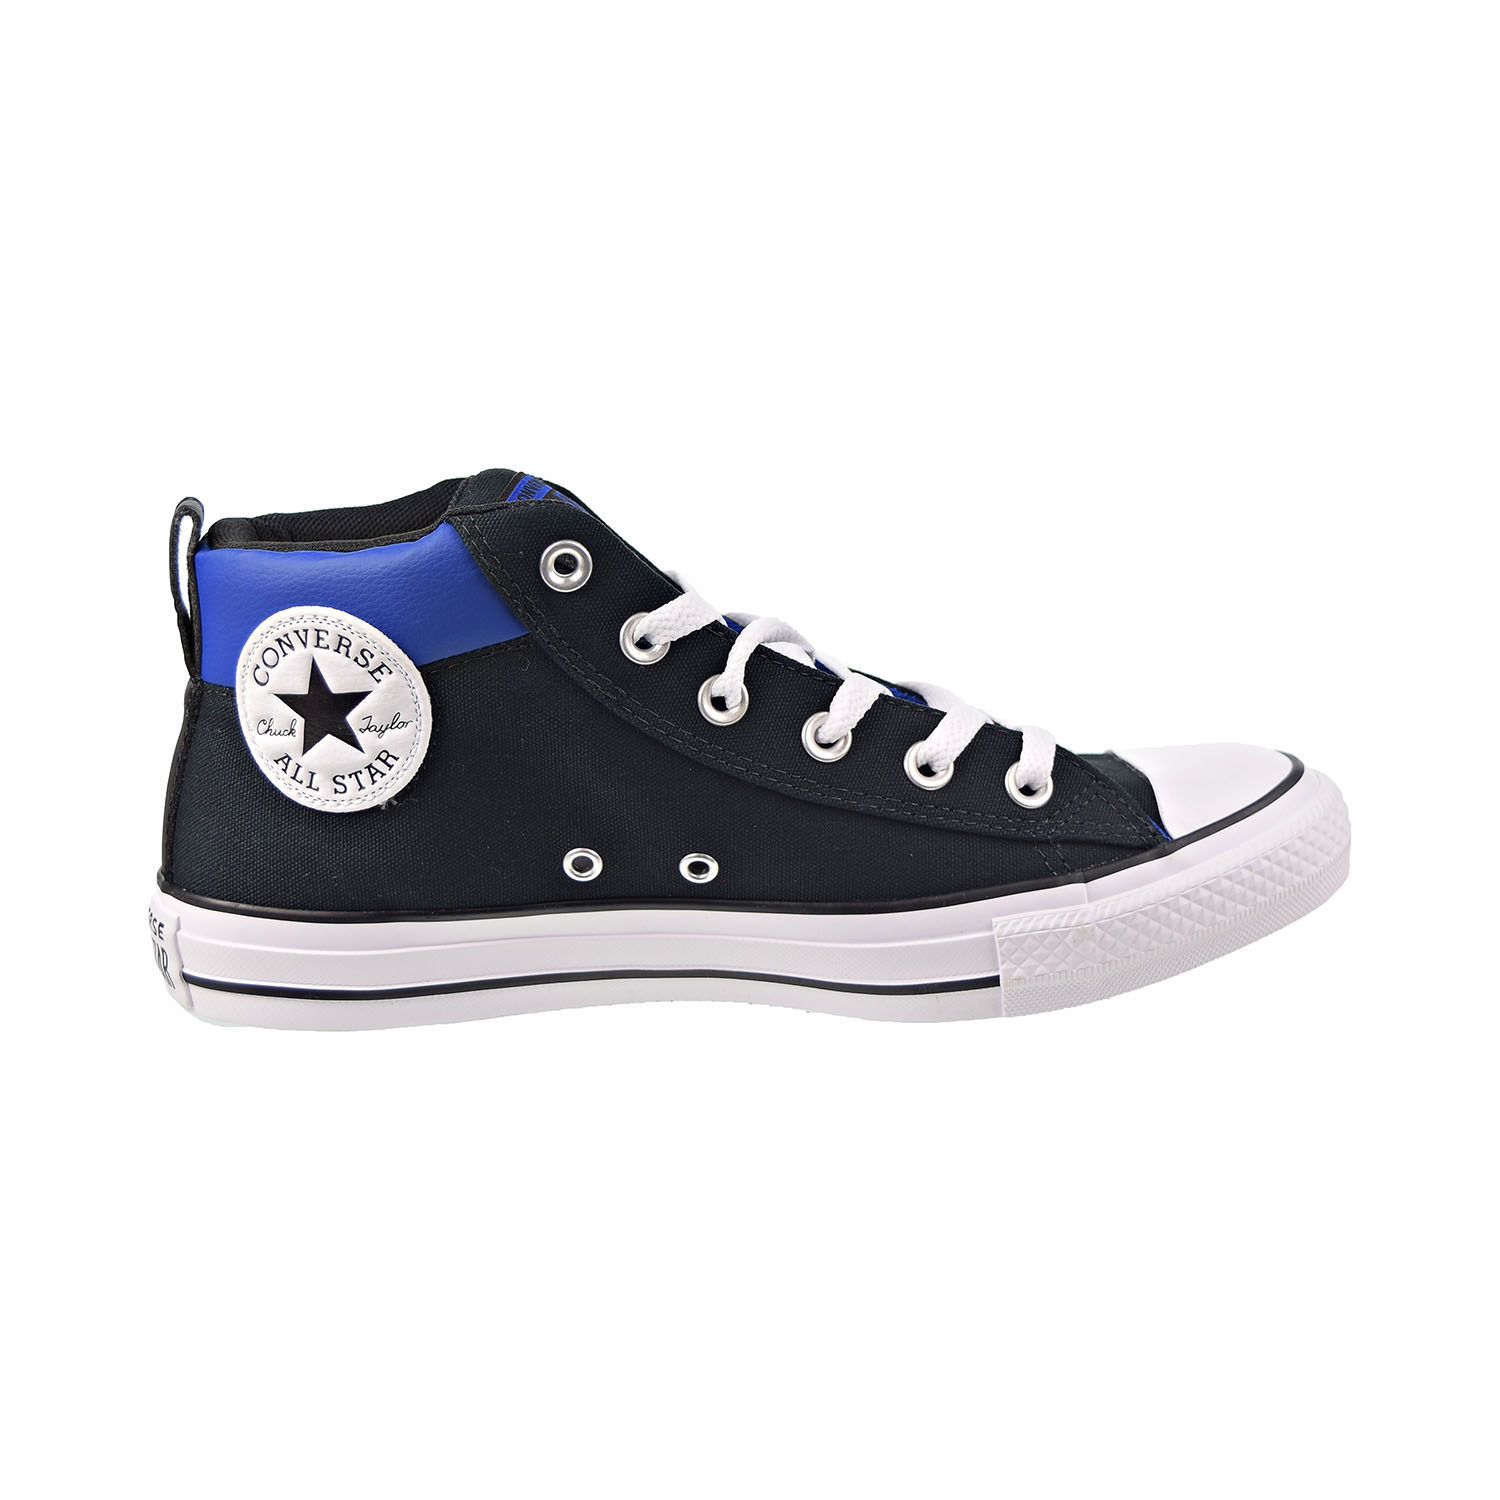 Converse Chuck Taylor All Star Street Mid Men's Shoes Black-White-Blue ...